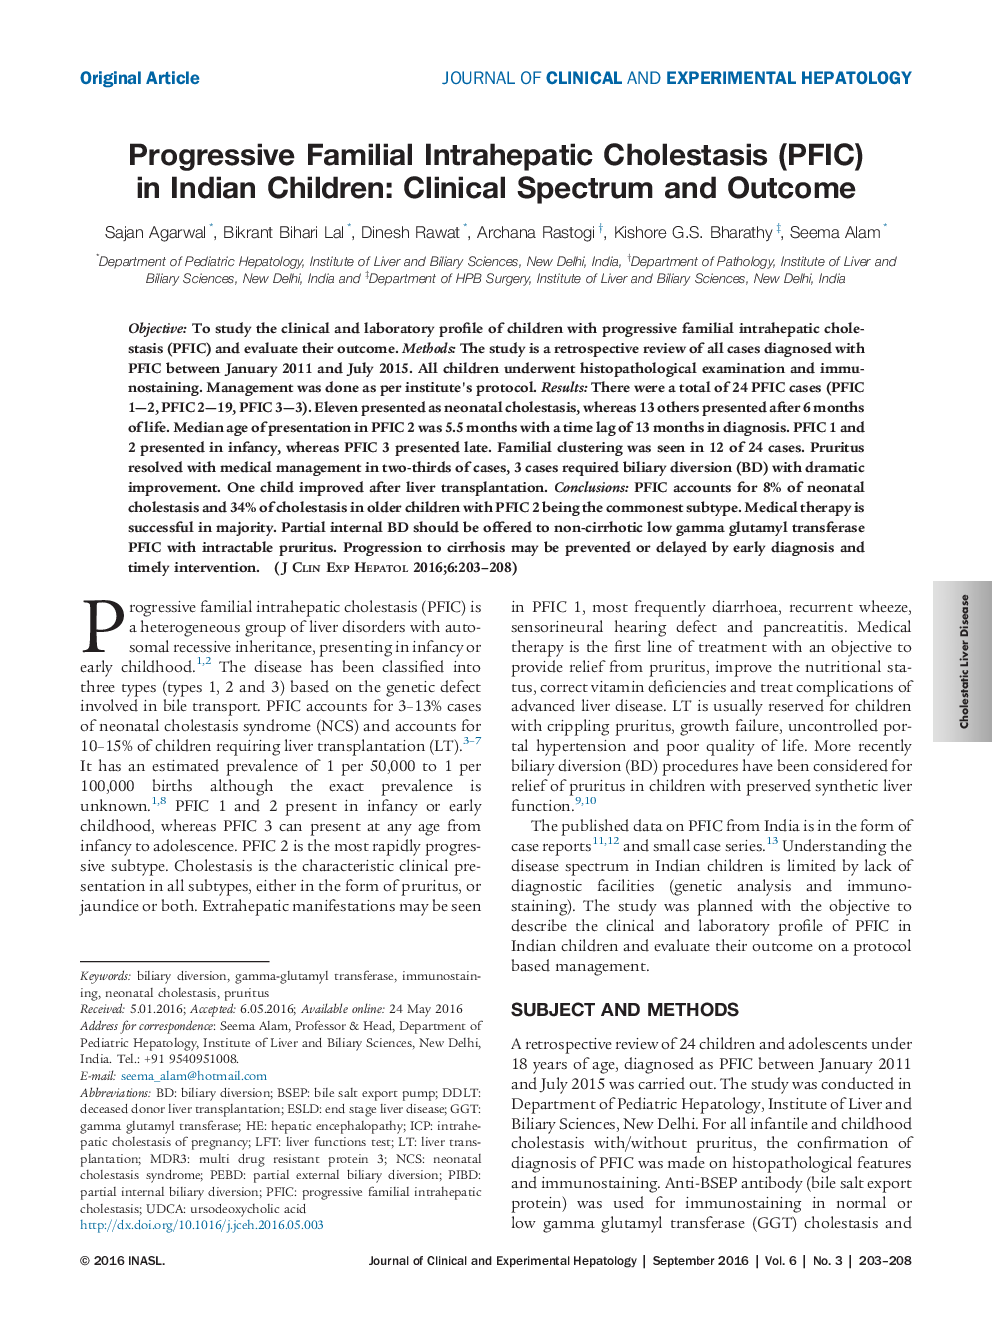 Progressive Familial Intrahepatic Cholestasis (PFIC) in Indian Children: Clinical Spectrum and Outcome